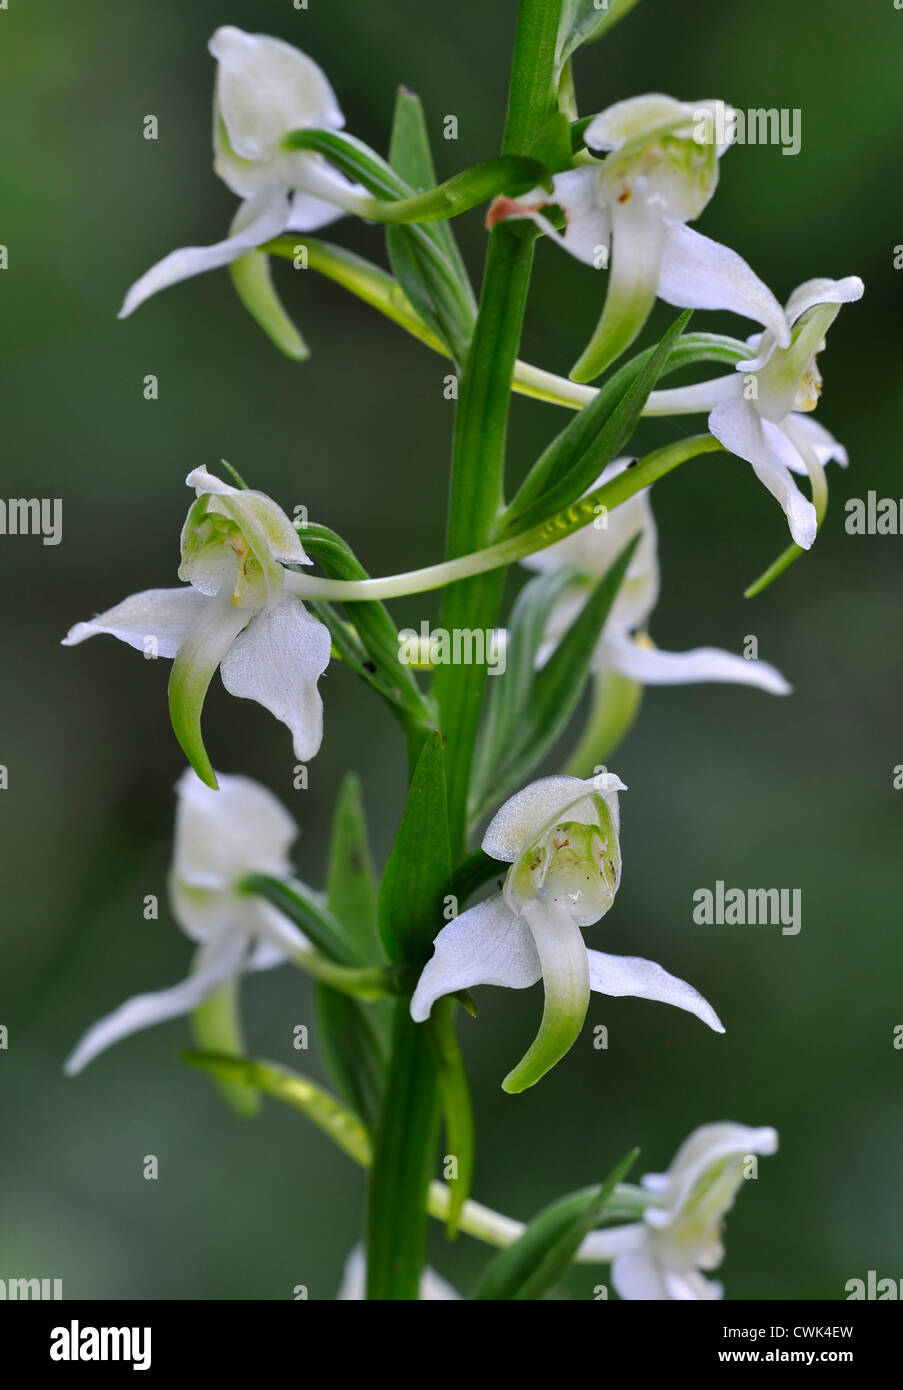 Greater butterfly orchid (Platanthera chlorantha / Platanthera montana) in flower Stock Photo